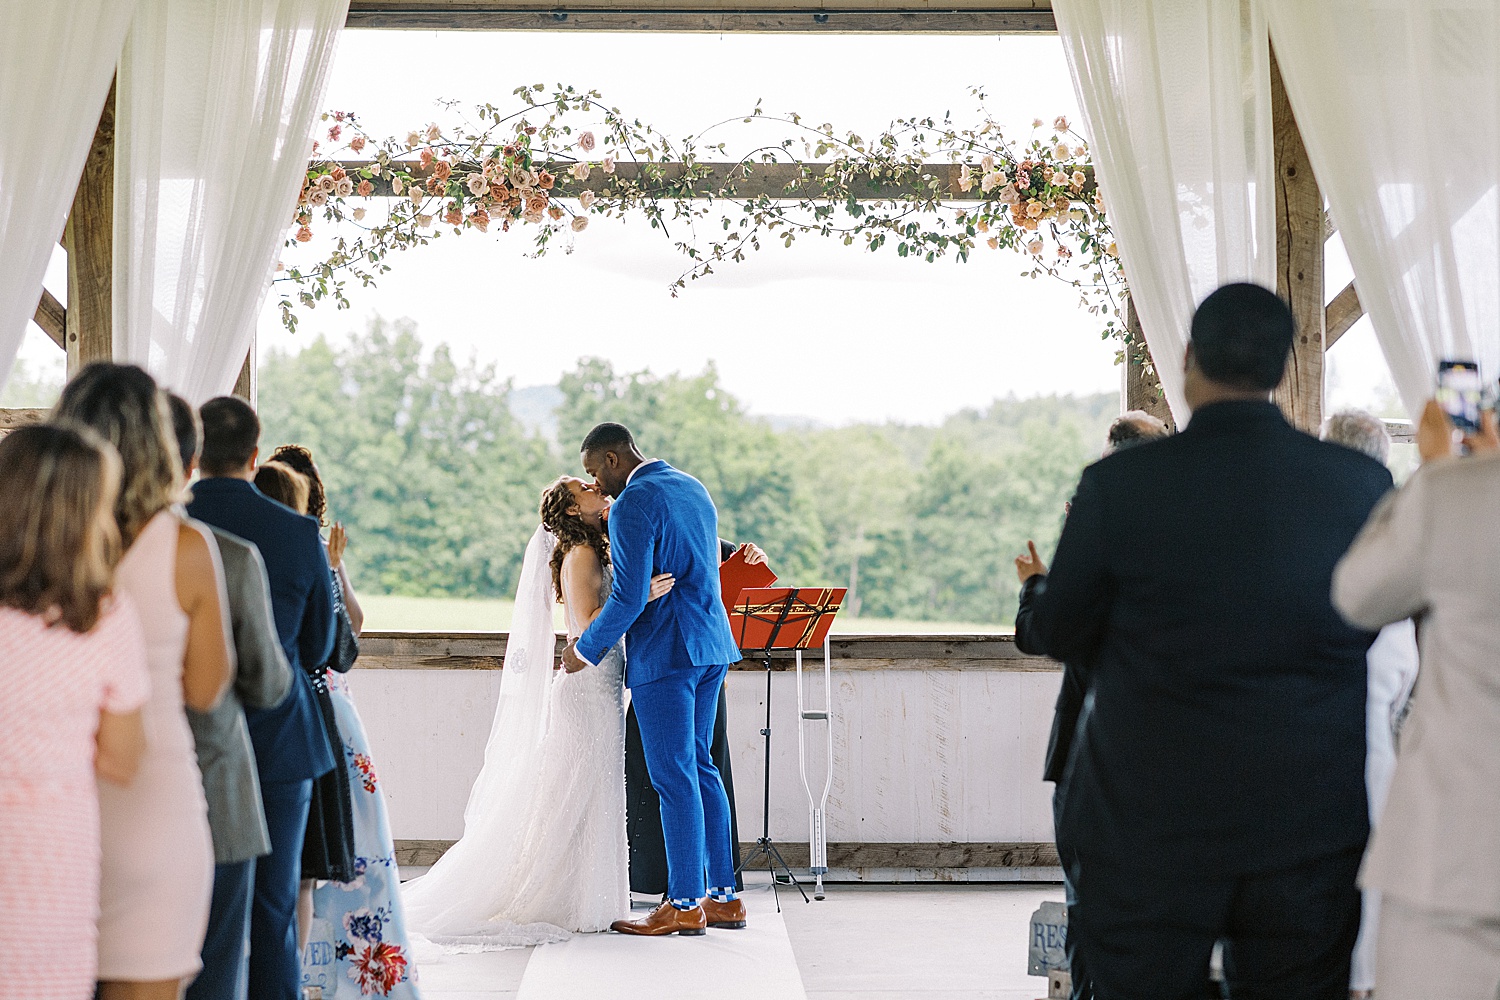 Bride and groom sharing first kiss at alter by Lynne reznick photography